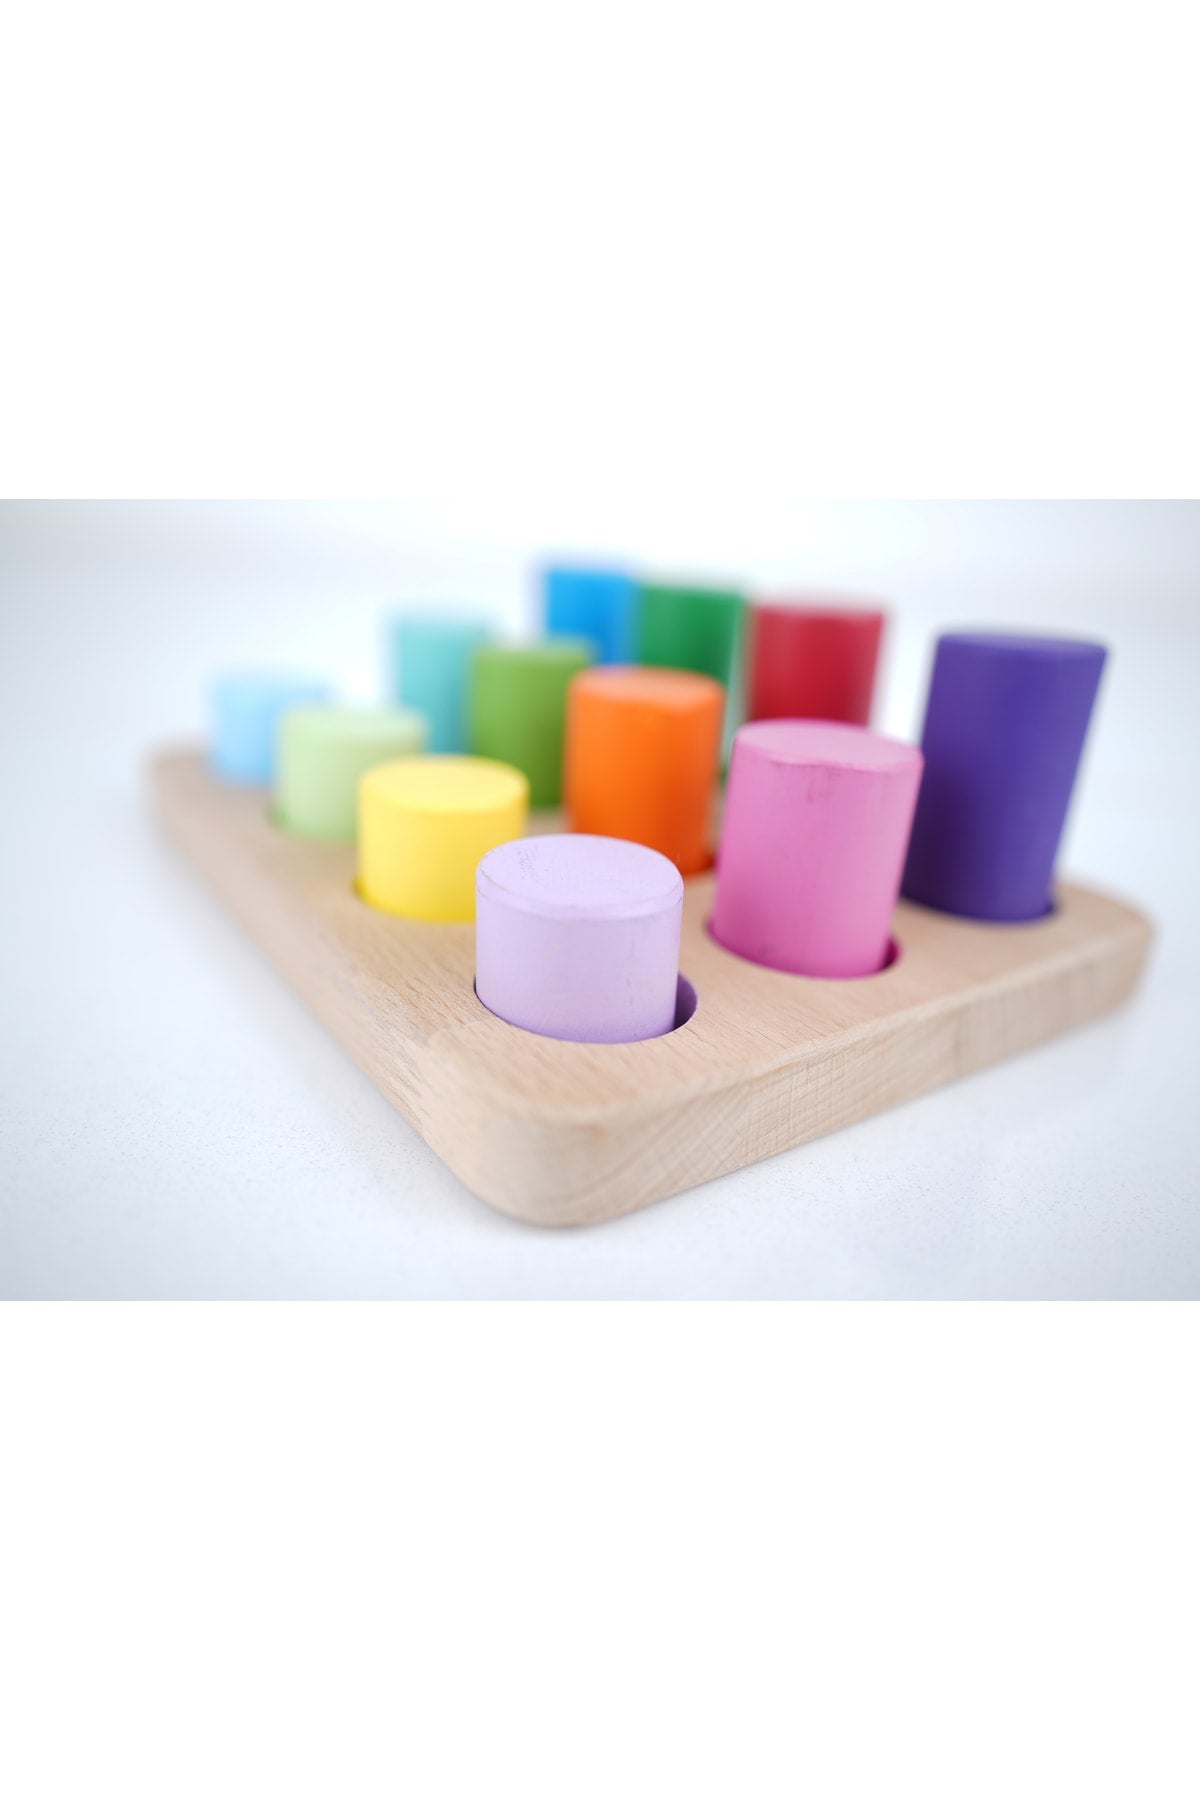 Cylinders with Montessori Matching Table